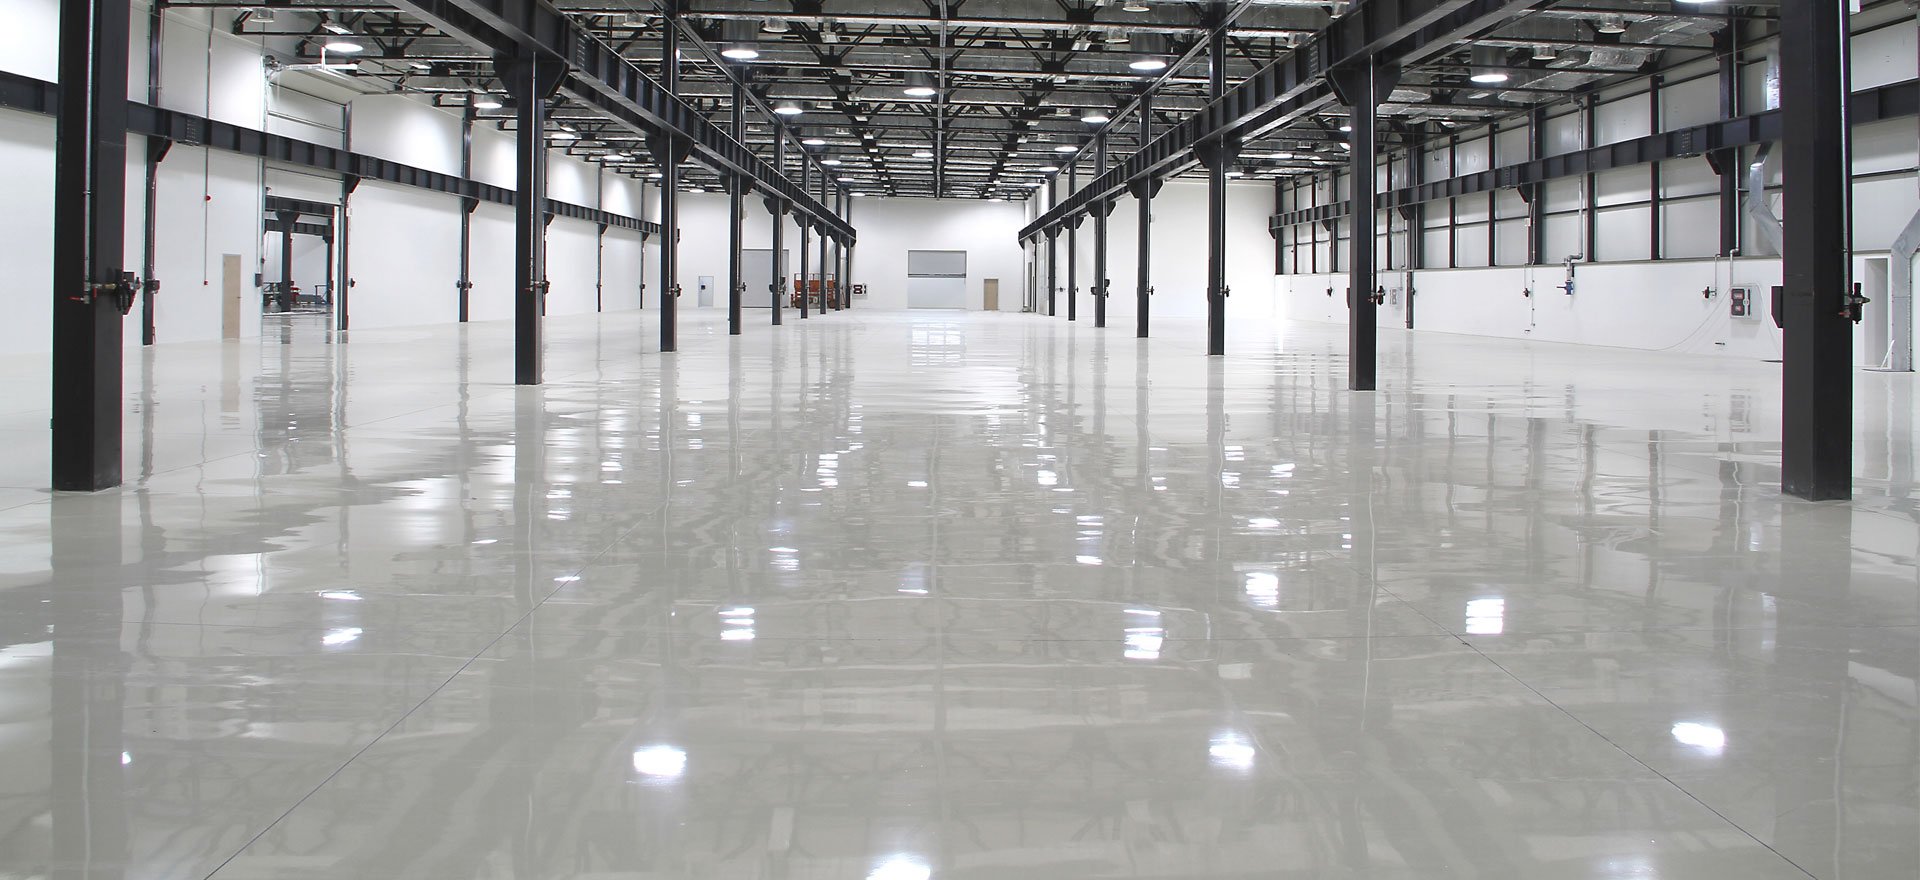 concrete-floor-repair-more-important-than-you-think-performance-industrial-1920-x-880